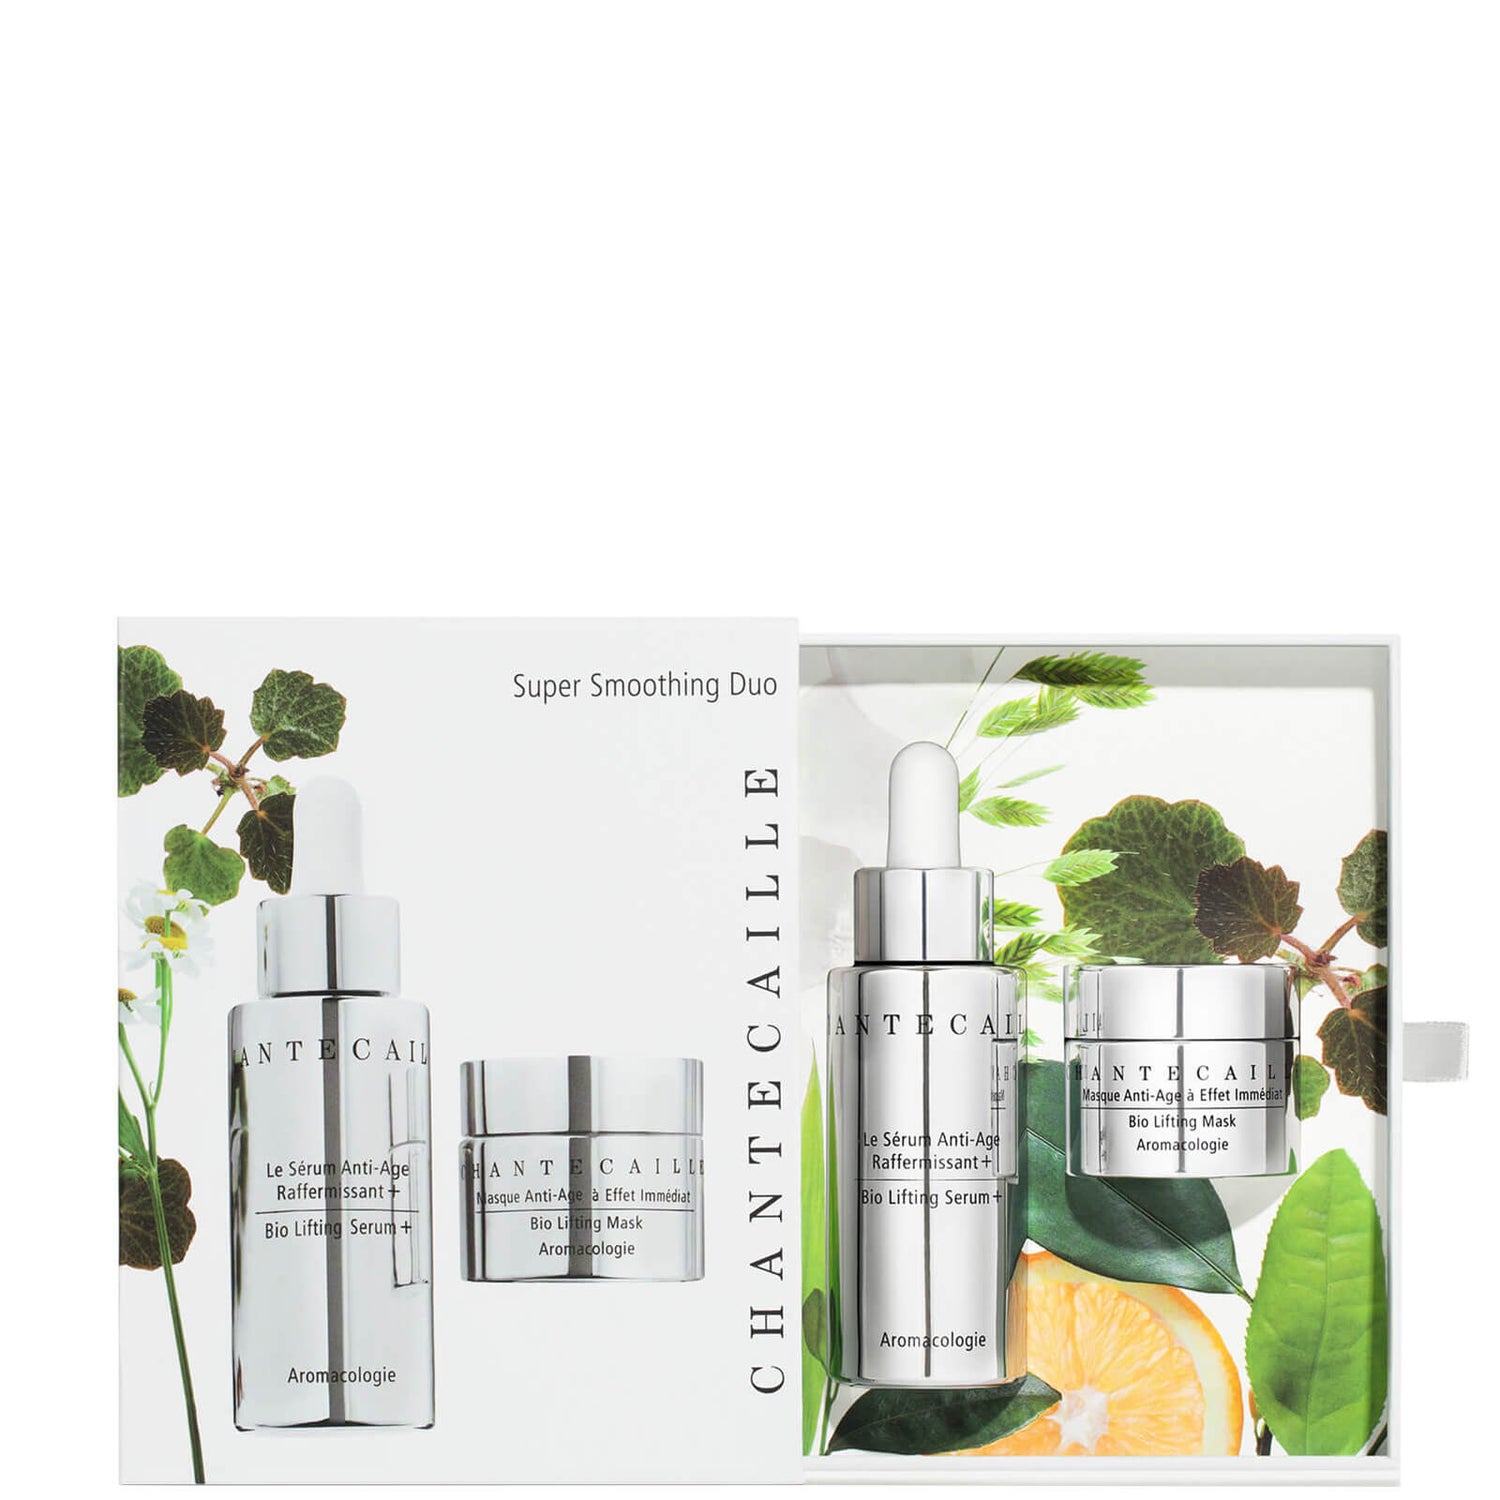 Chantecaille Super Smoothing Duo